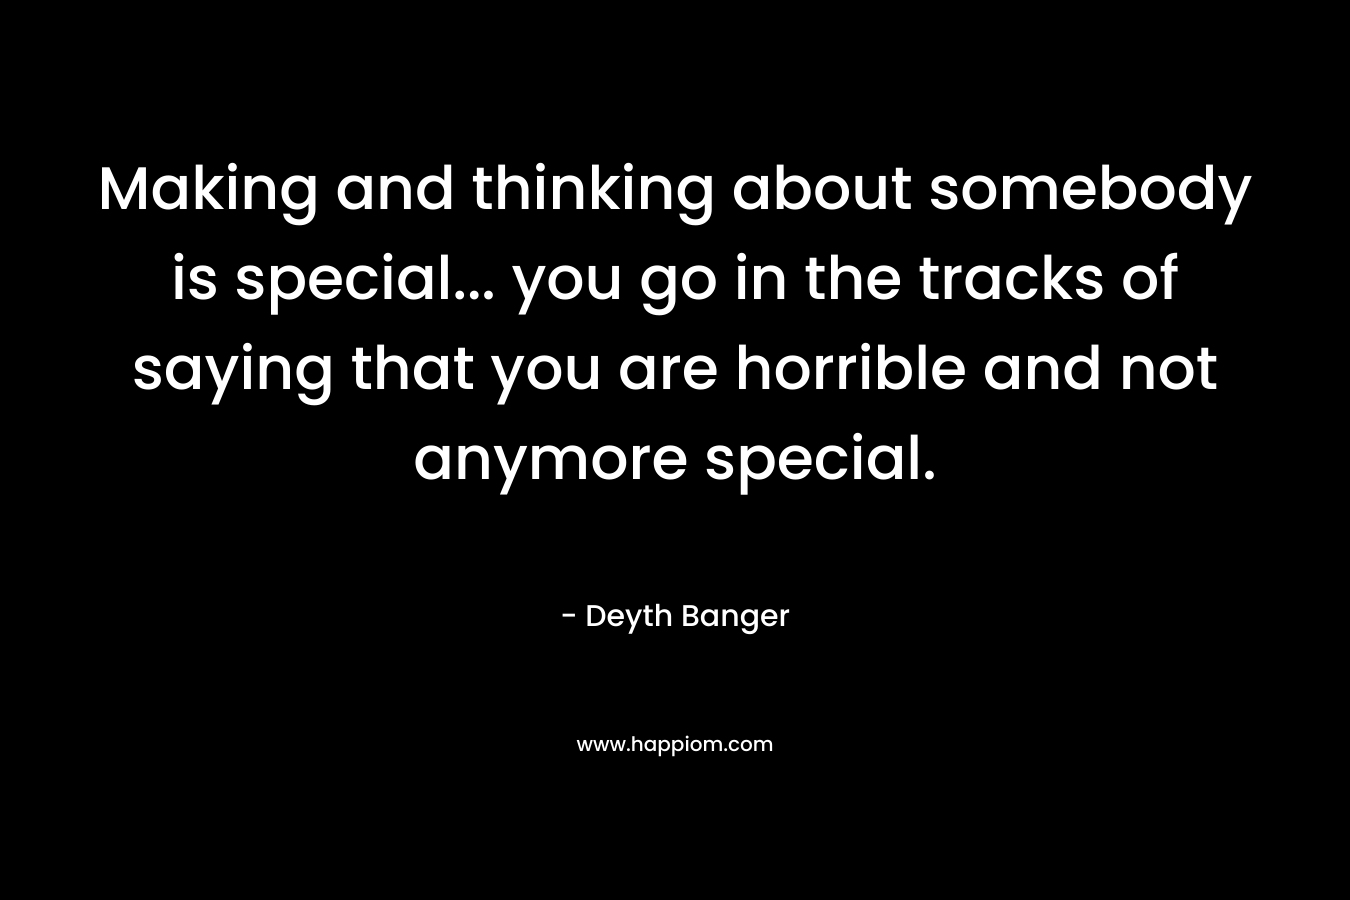 Making and thinking about somebody is special… you go in the tracks of saying that you are horrible and not anymore special. – Deyth Banger